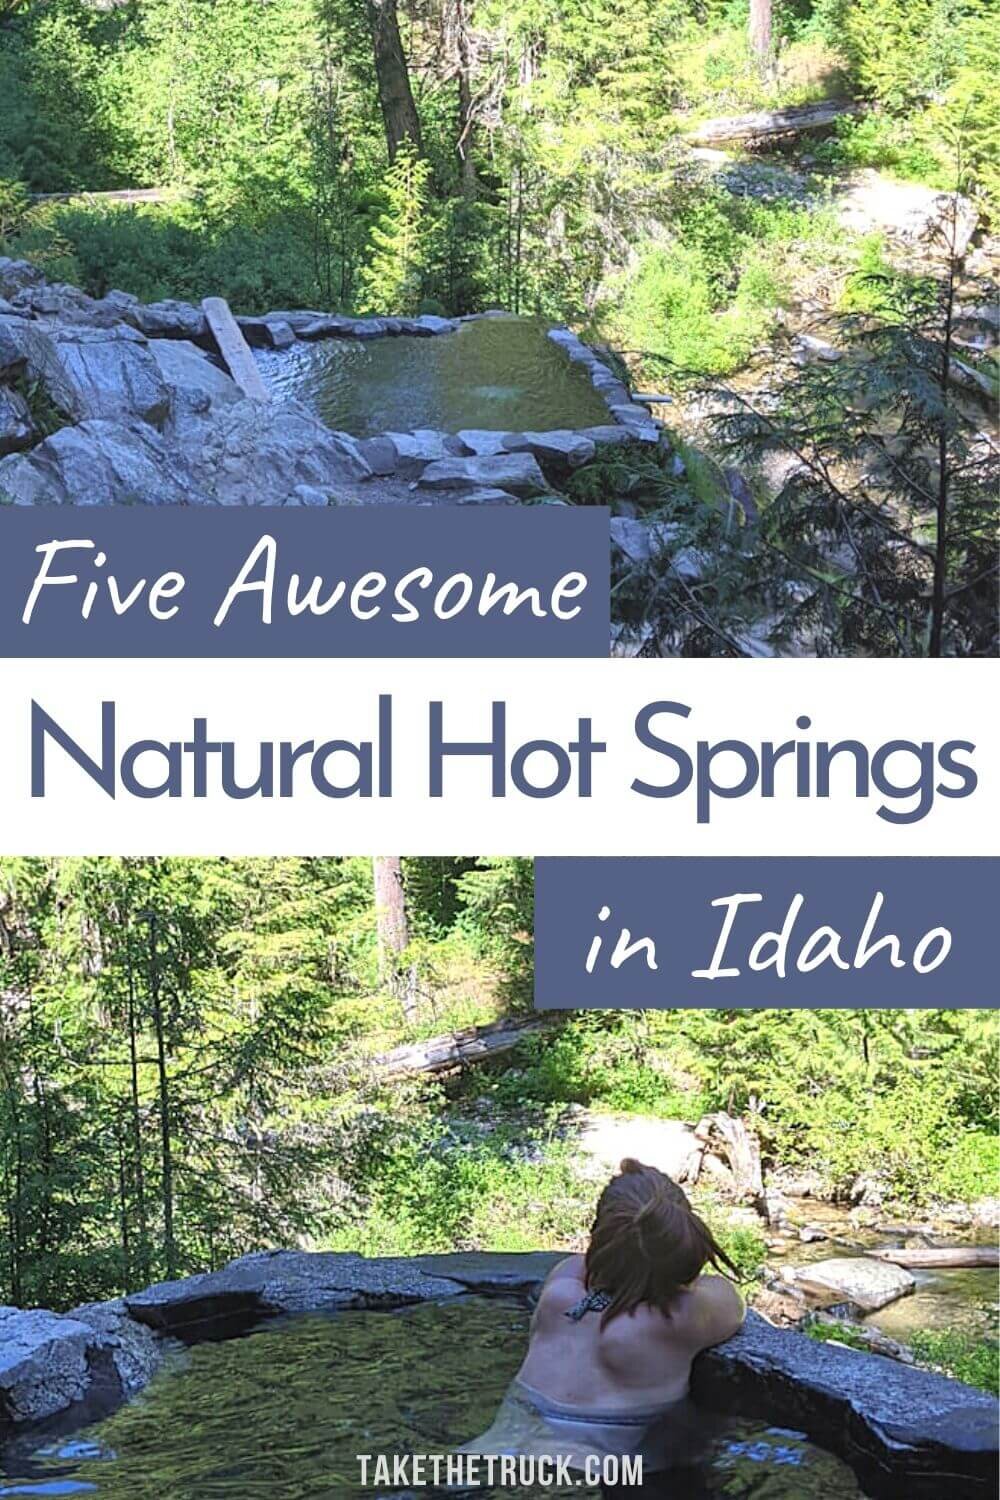 Check out these 5 awesome natural hot springs in Idaho - Weir Creek, Sacajawea, Trail Creek, Rocky Canyon, and Goldbug Hot Springs. Add these hot springs to your Idaho road trip list!